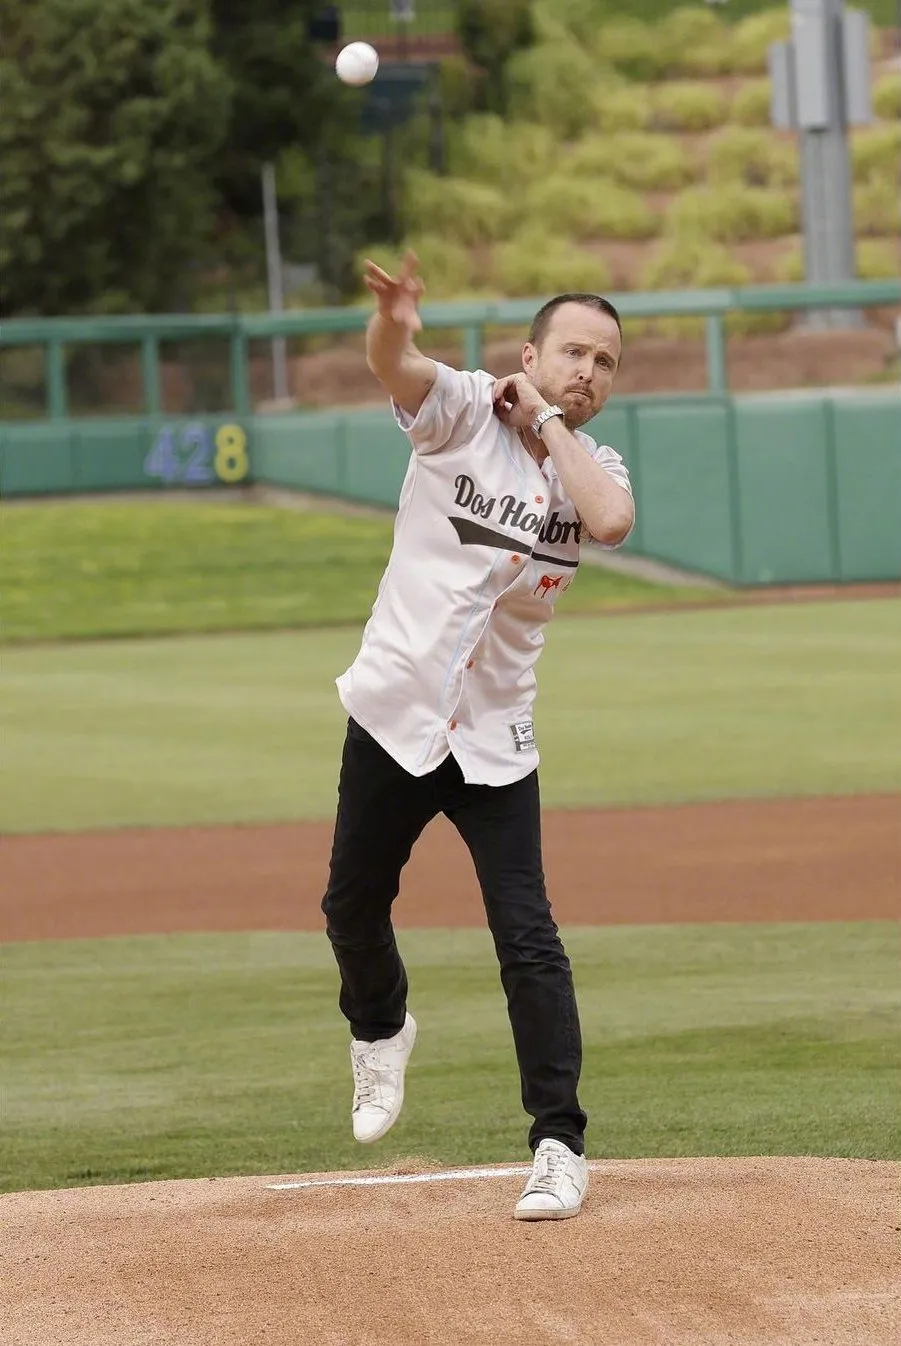 Bryan Cranston and Aaron Paul at the recent 'Breaking Bad' charity baseball game | FMV6